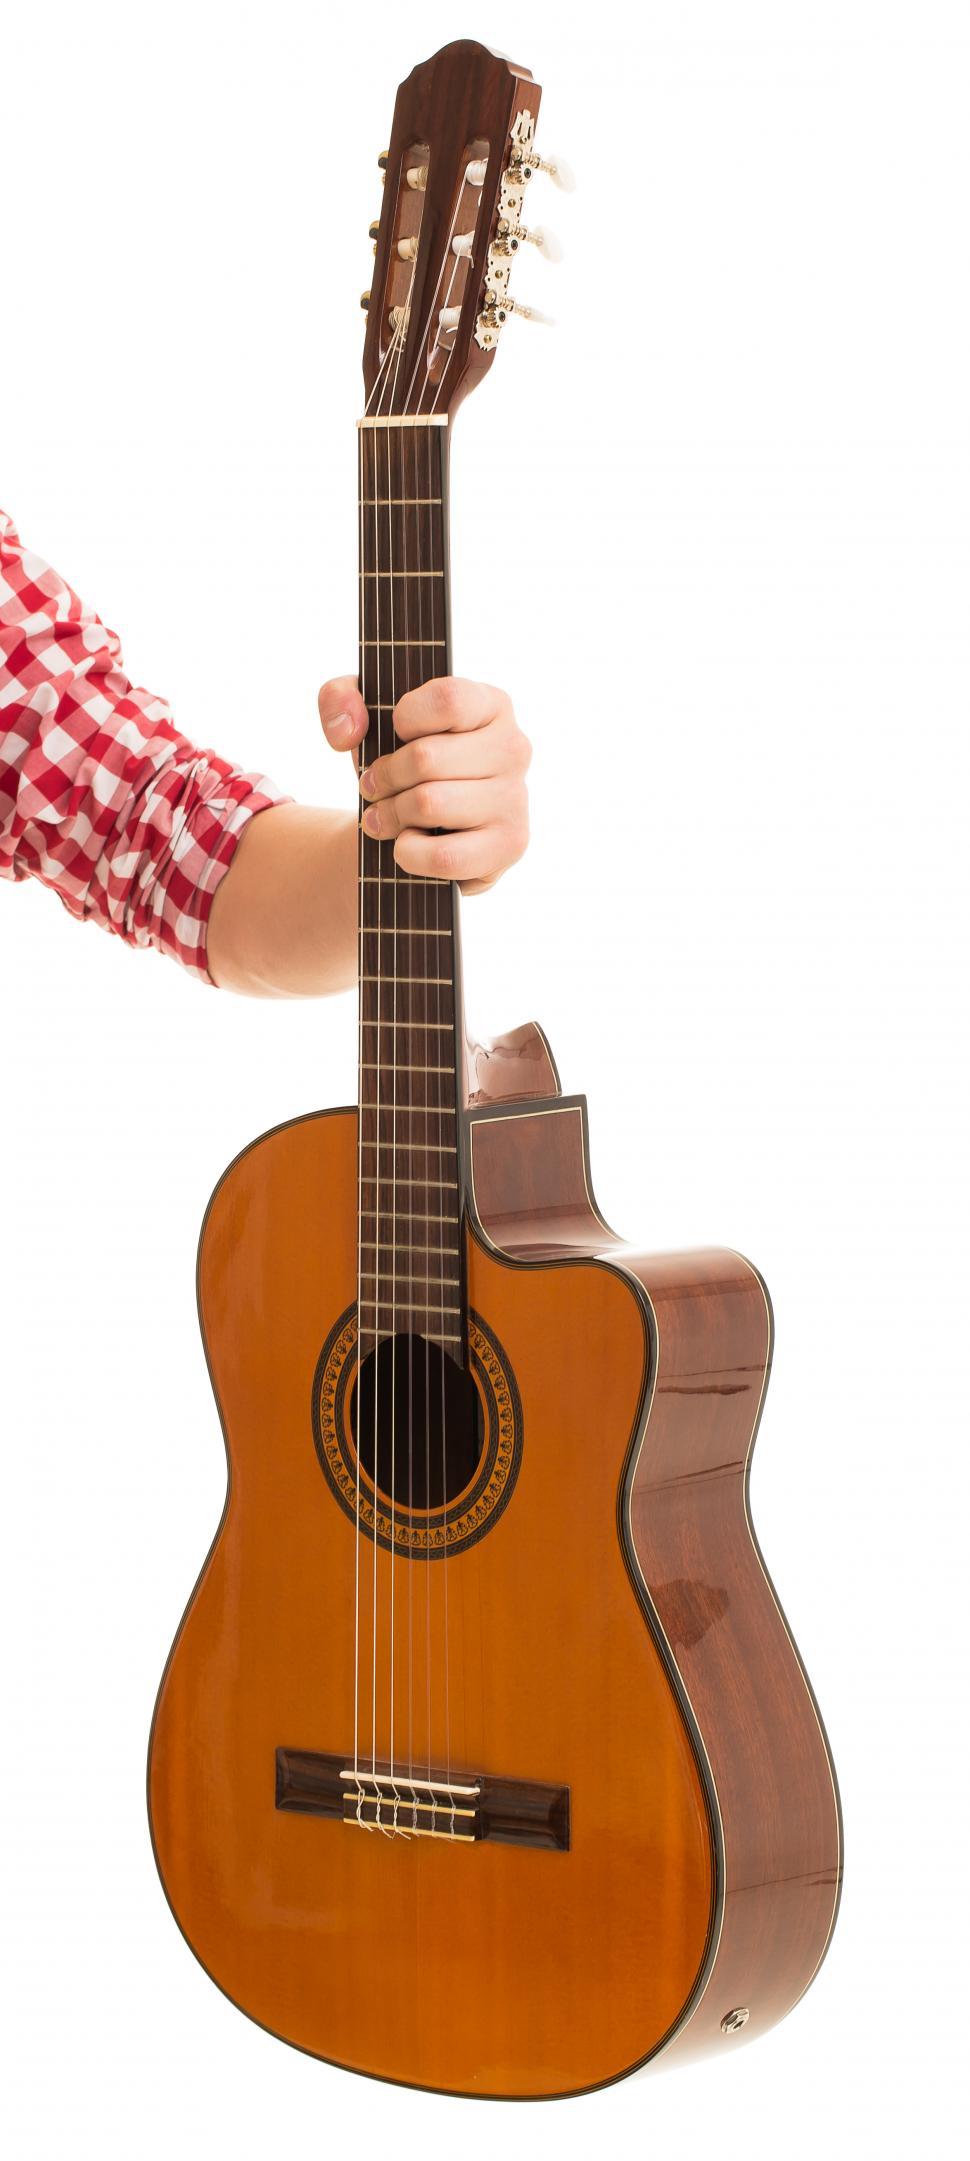 Free Image of Music, close-up. Man holding an acoustic wooden guitar 